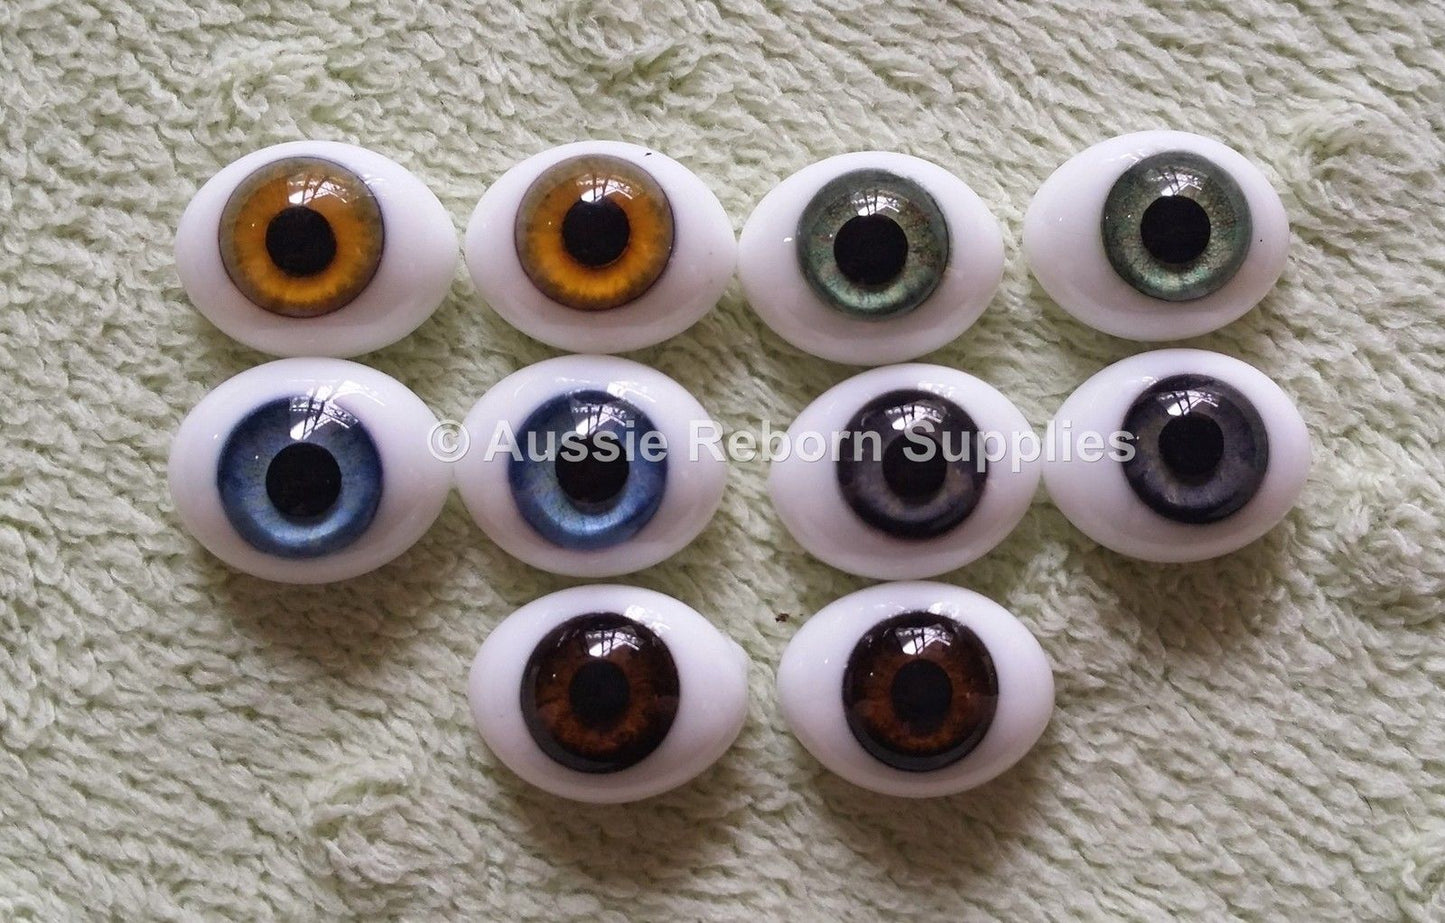 18mm Meadow Green Oval Glass Eyes Reborn Baby Doll Making Supplies